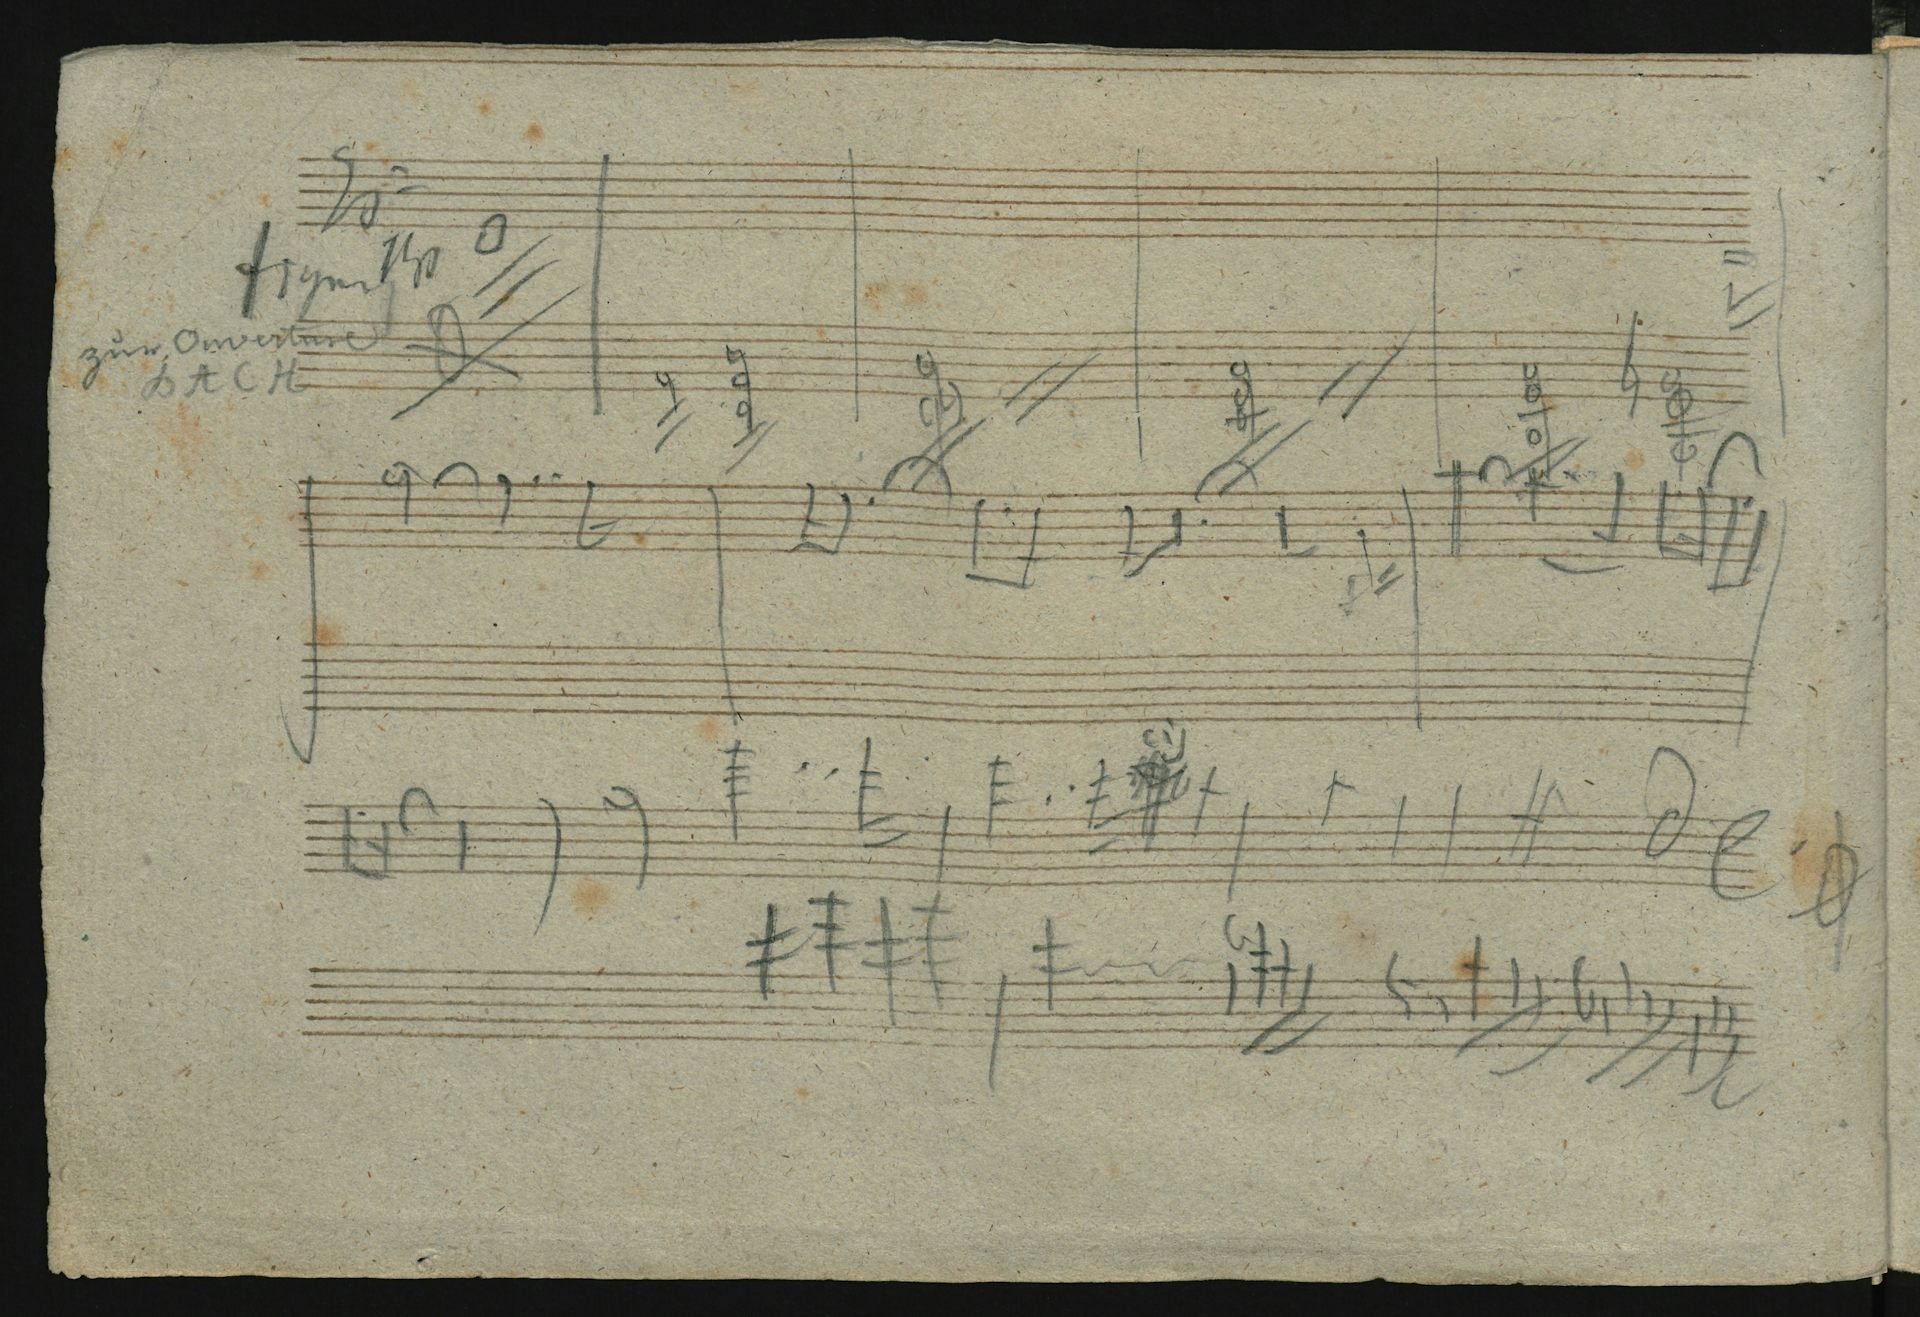 Piece of a Beethoven symphony with musical notes jotted on it